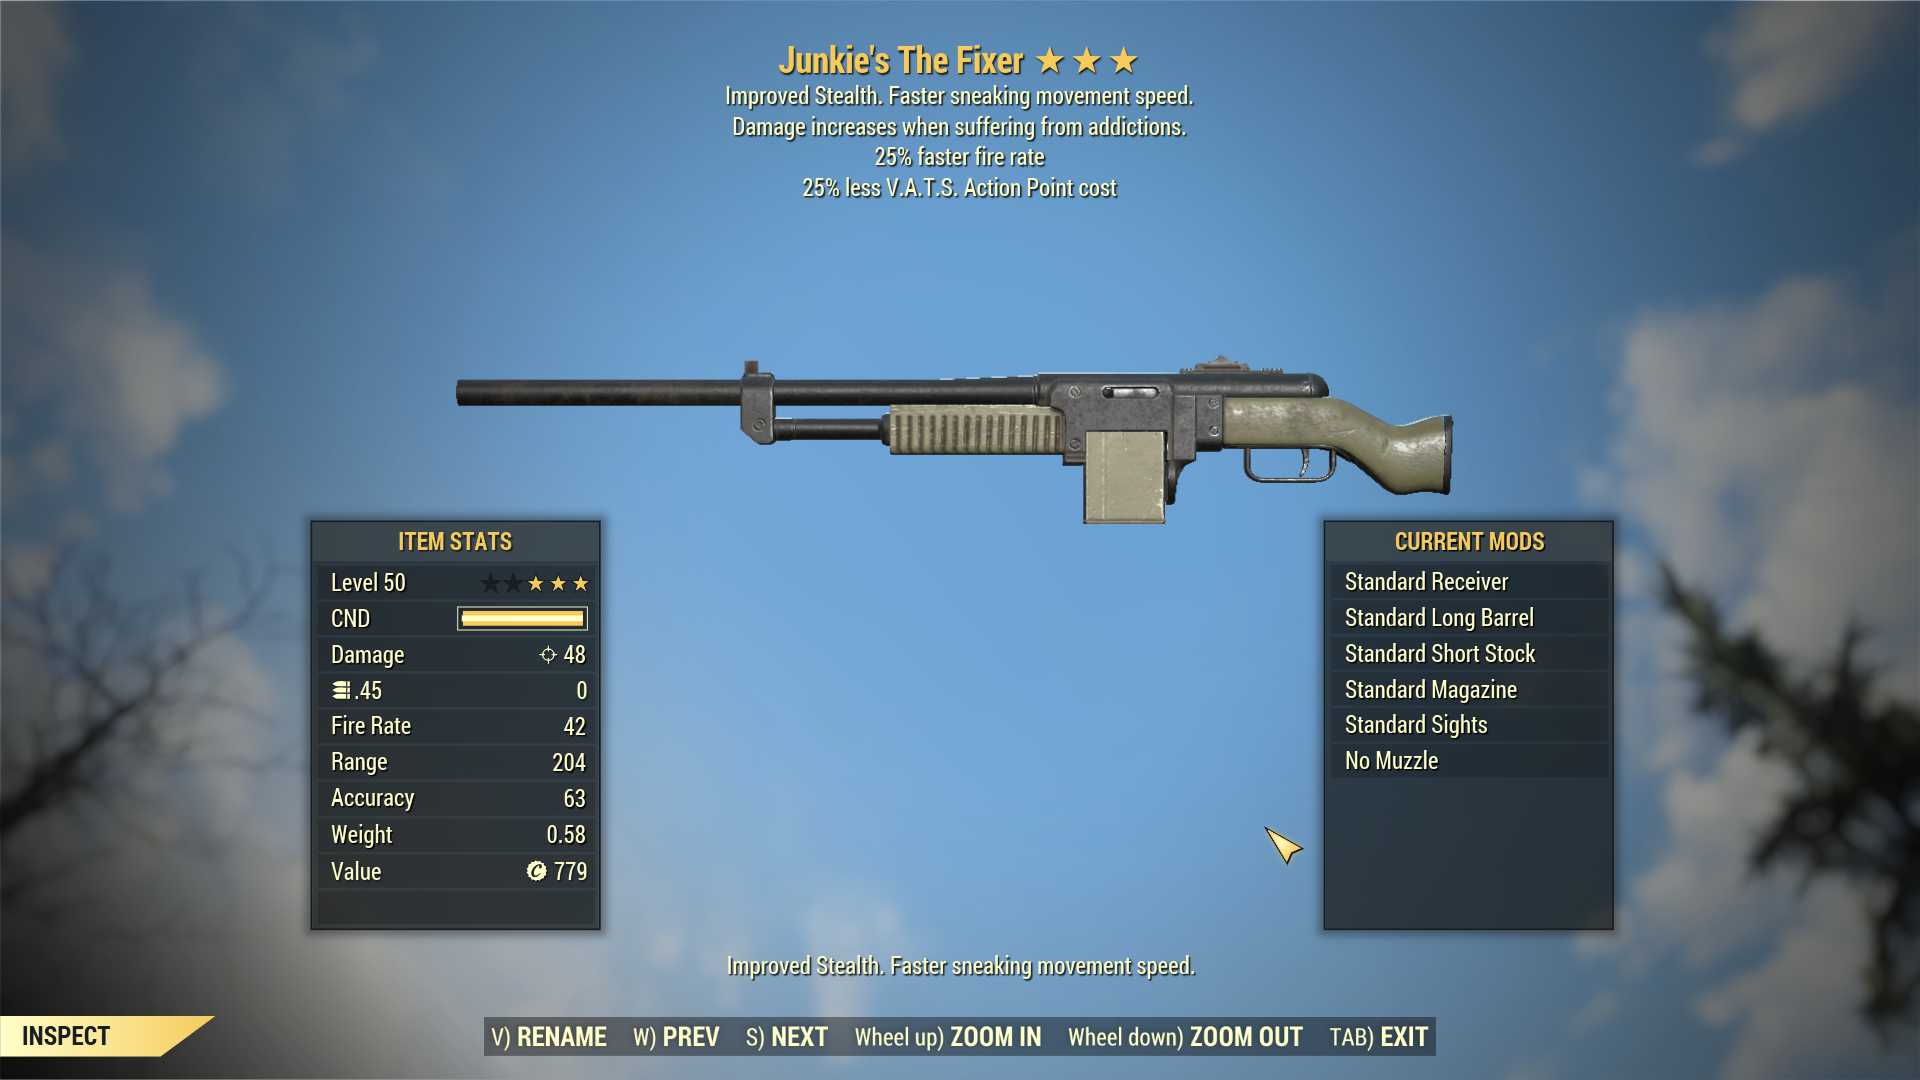 Junkie's The Fixer (25% faster fire rate, 25% less VATS AP cost)